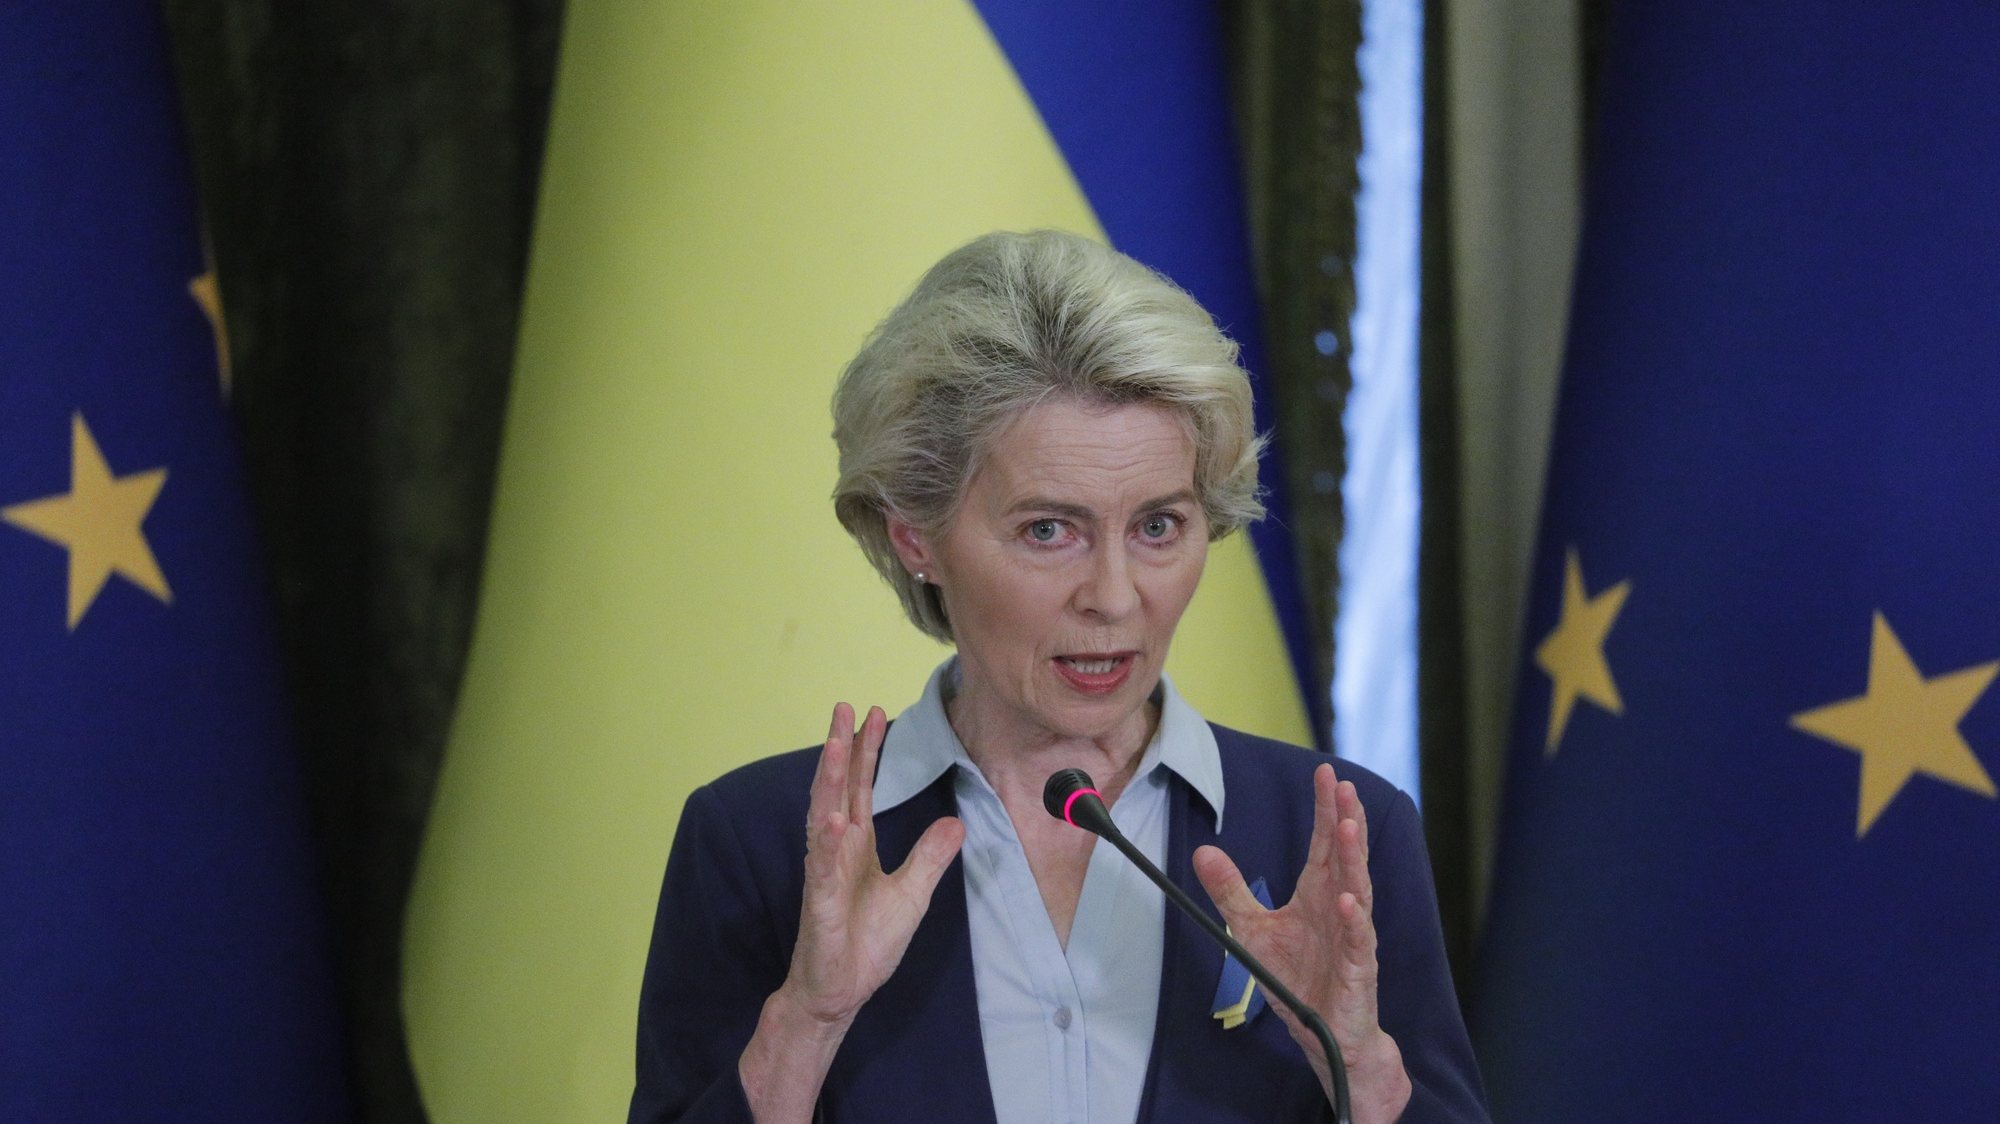 epa10007670 President of EU Commission Ursula von der Leyen giving her statement after meeting with Ukrainian President Volodymyr Zelensky in Kyiv, Ukraine, 11 June 2022. Ursula von der Leyen arrived in Kyiv for a working visit to meet with top officials and express their support for Ukraine amid the Russian invasion.  EPA/SERGEY DOLZHENKO